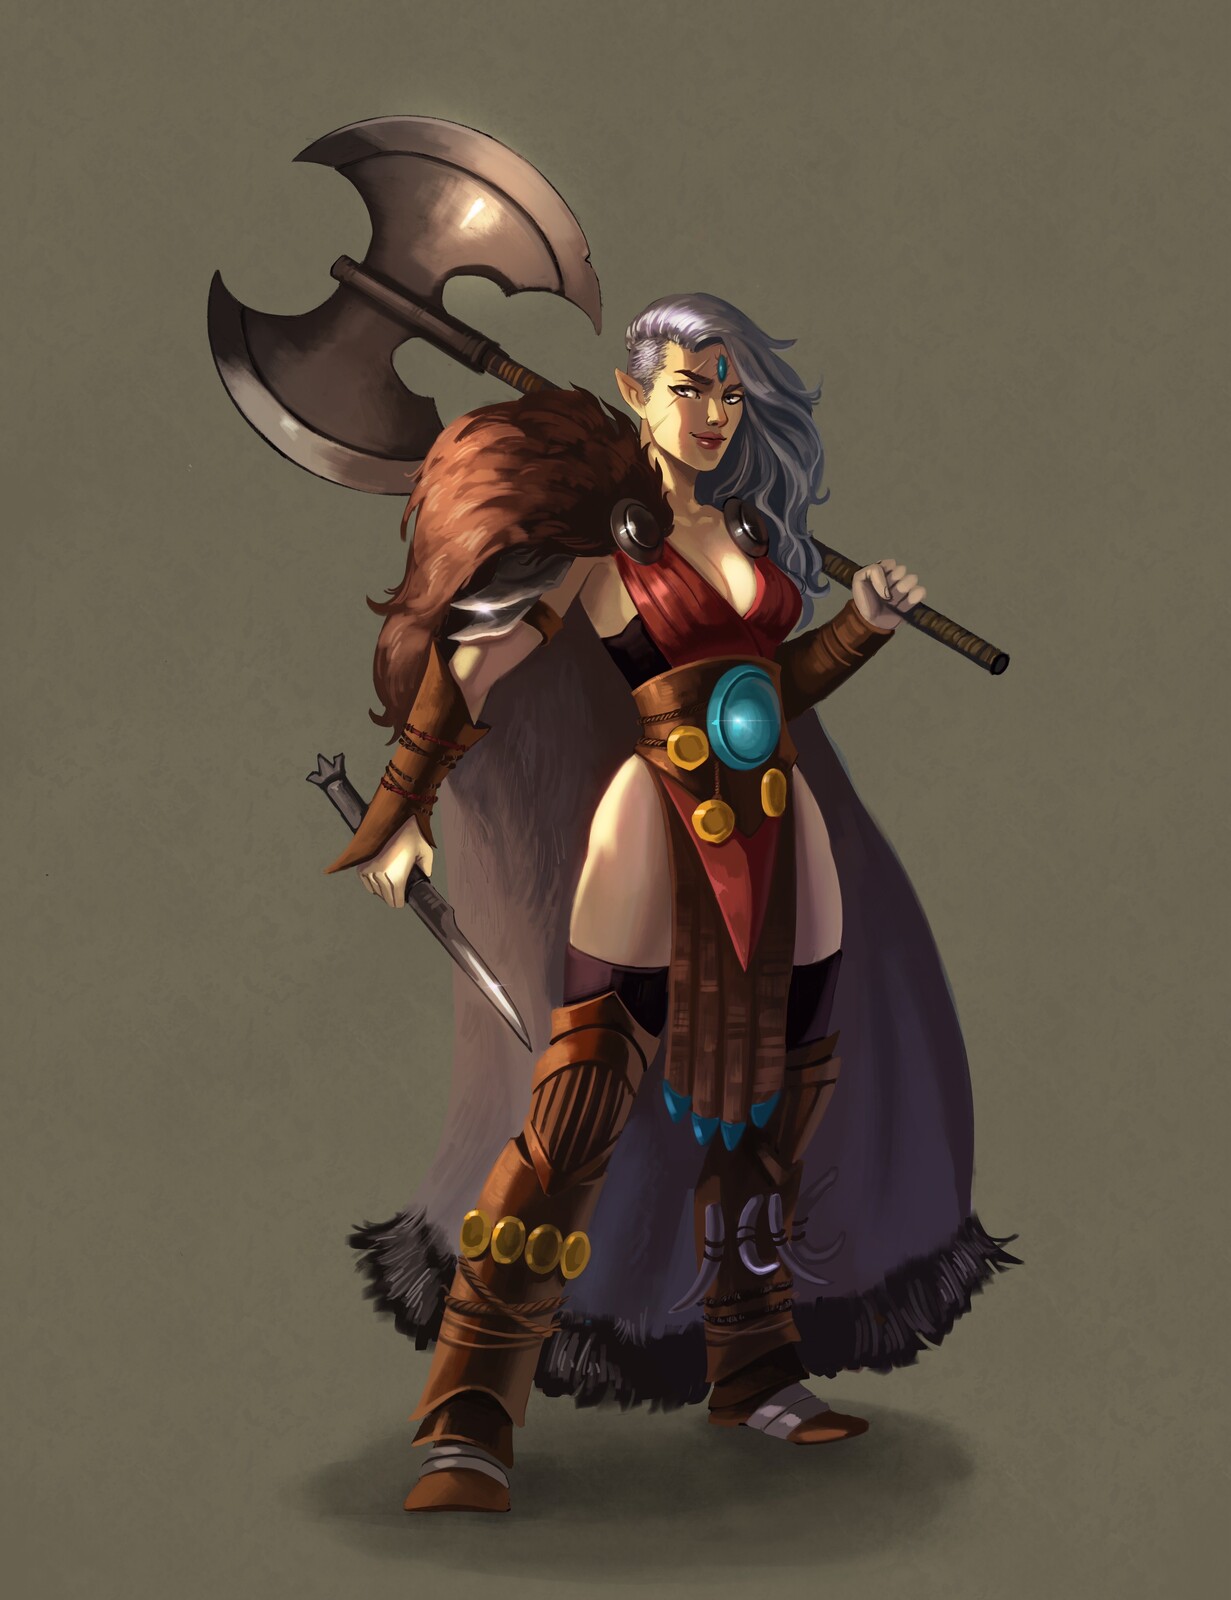 This is the final design for a half elf barbarian